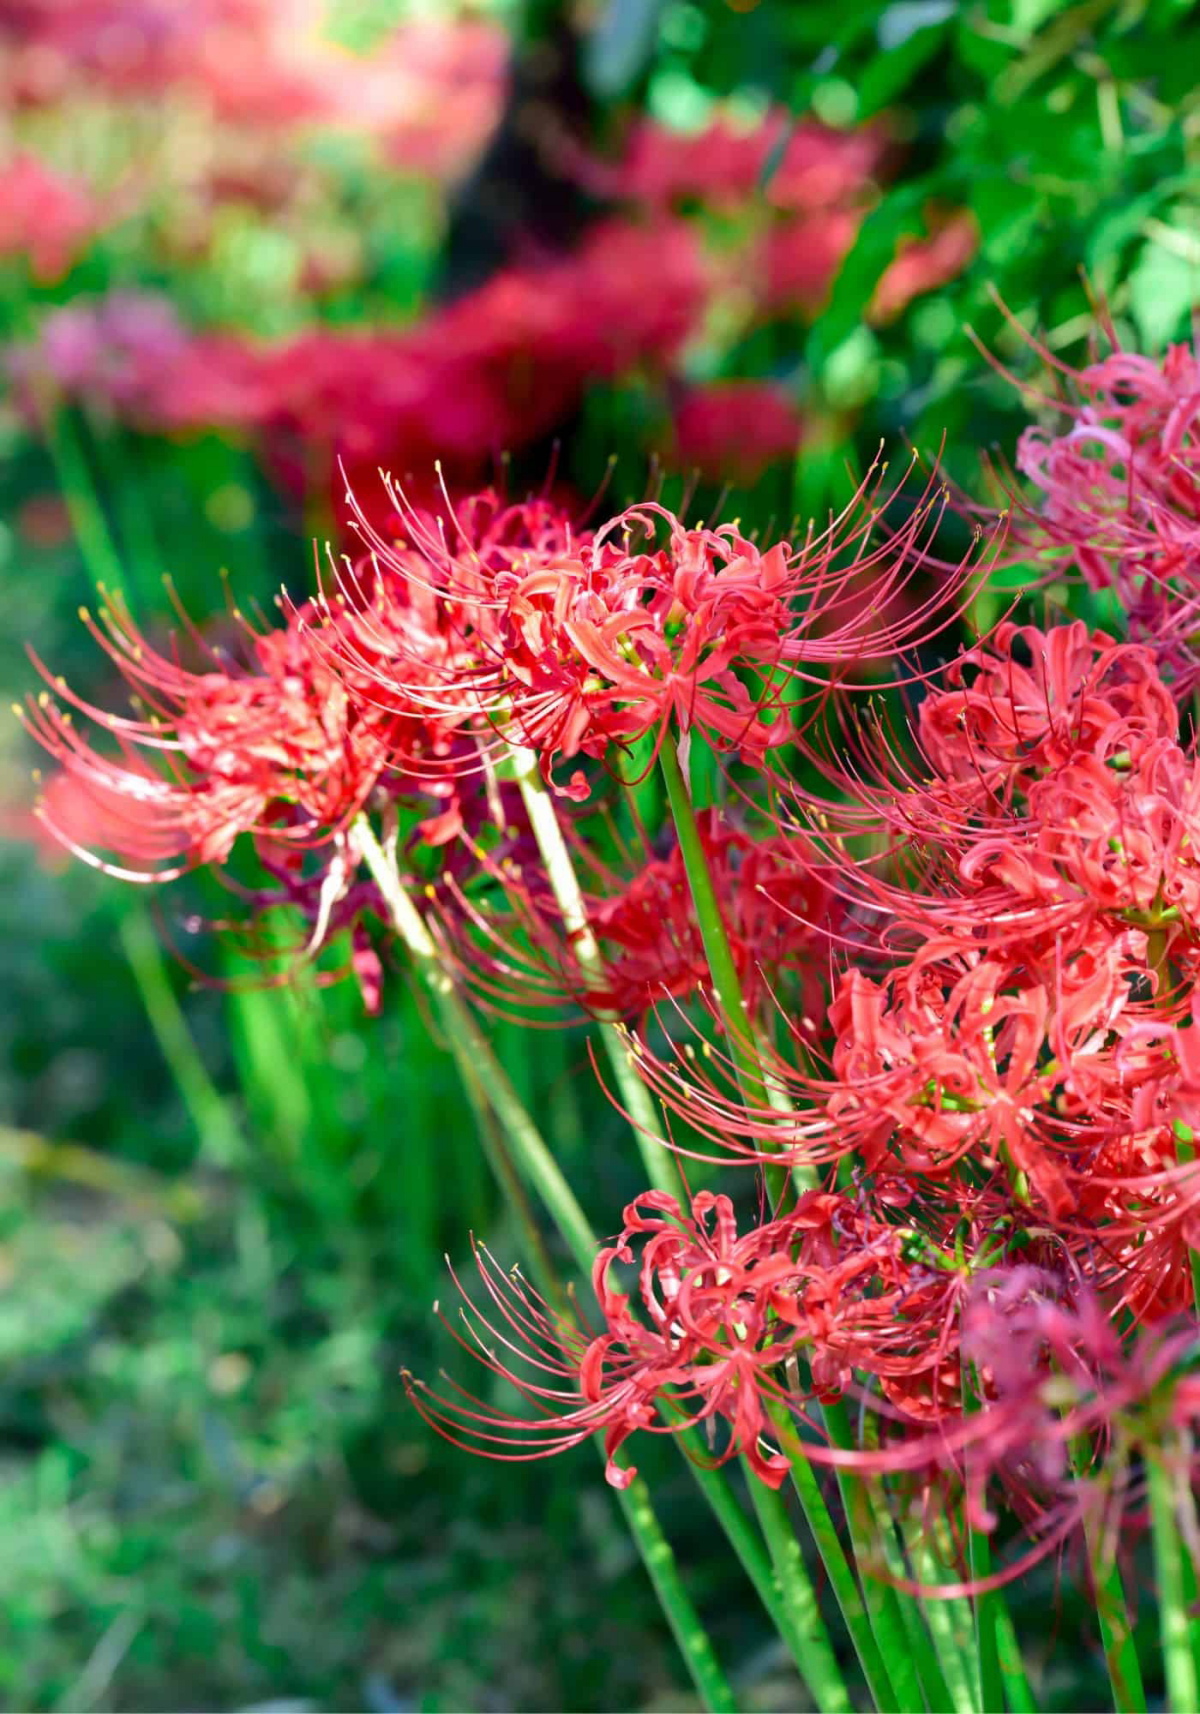 is the red spider lily poisonous